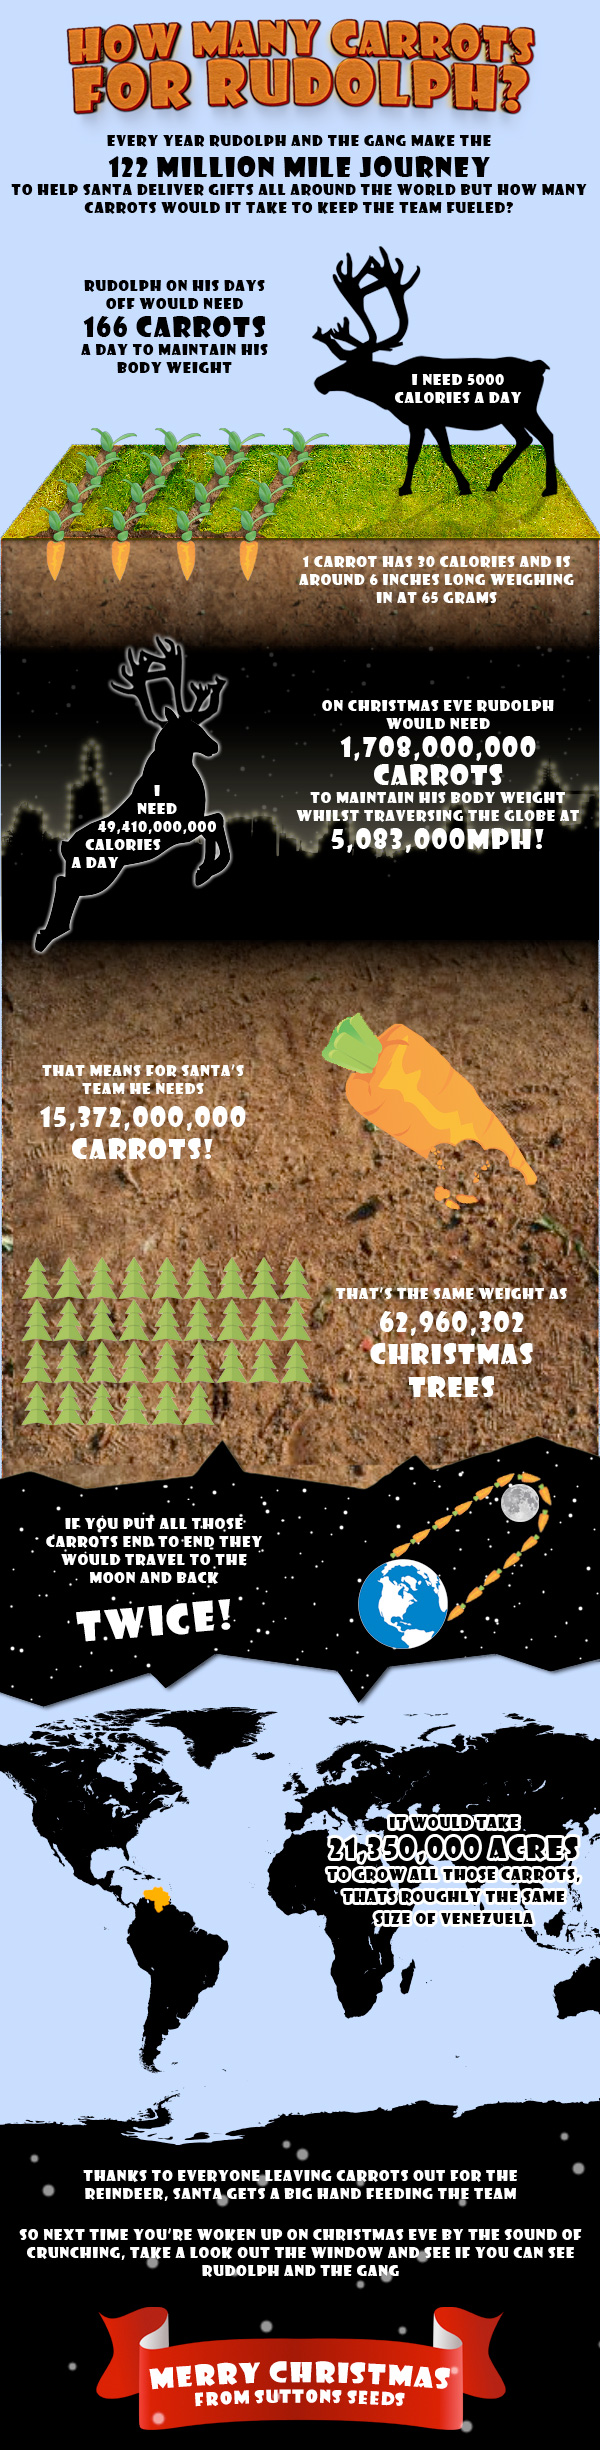 Infographic: How many carrots does rudolf need?